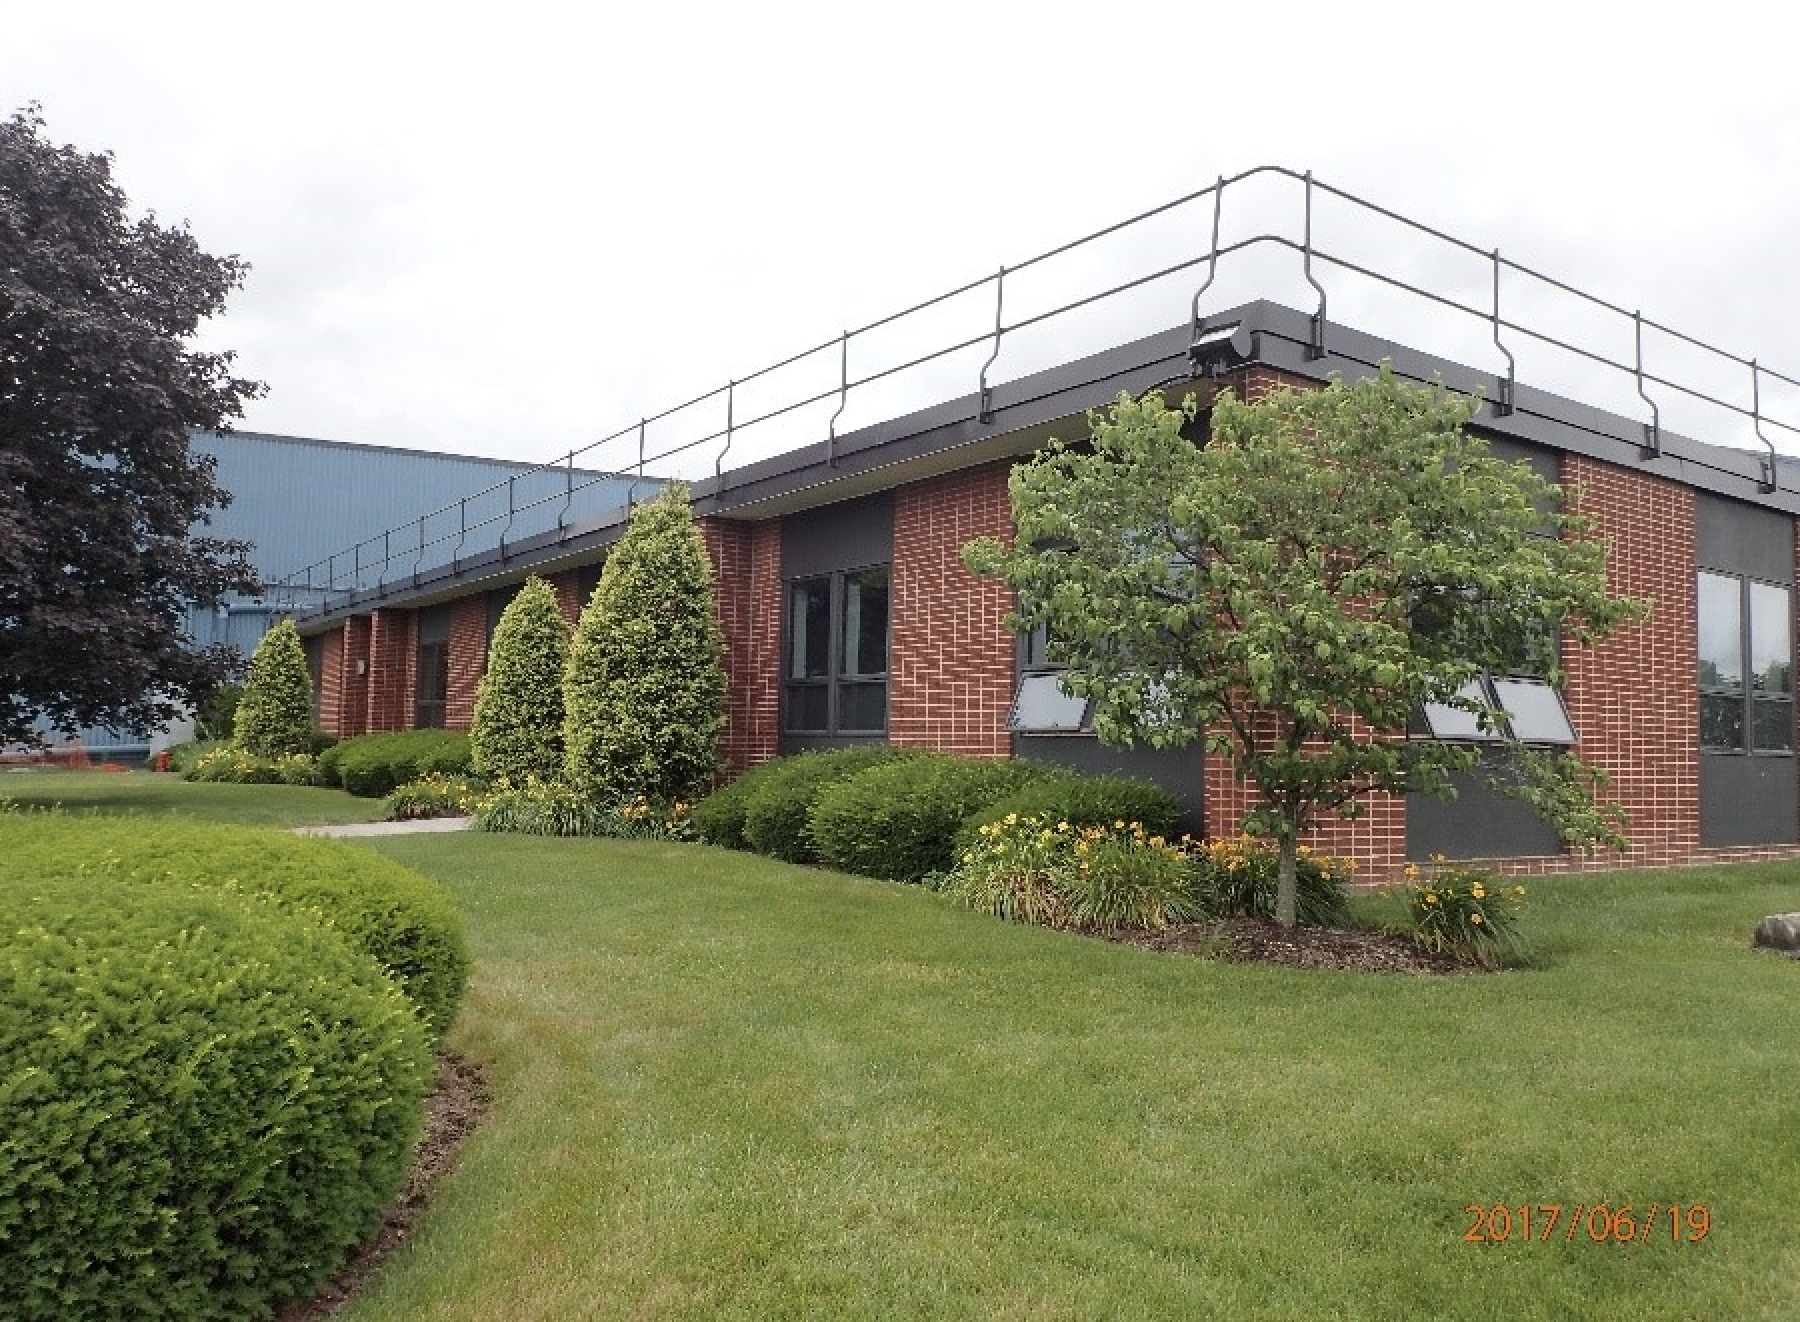 GAF’s facility in New Columbia, Pa., is latest in the more than $2 billion investment GAF has contributed to the roofing industry over the last 10 years. Photo: GAF.